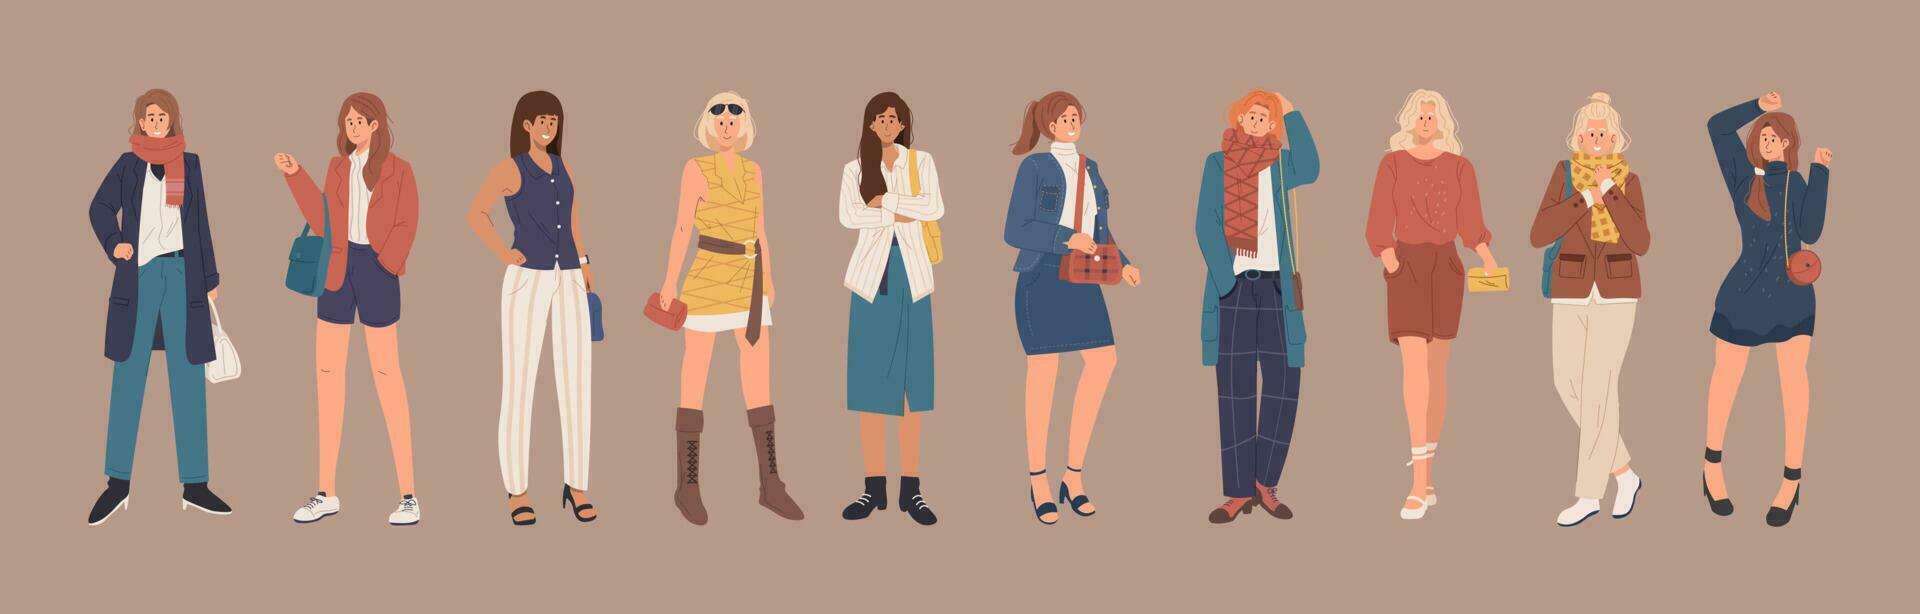 Collection of stylish women dressed in casual and formal trendy clothes. Young fashionable girls flat cartoon illustration vector